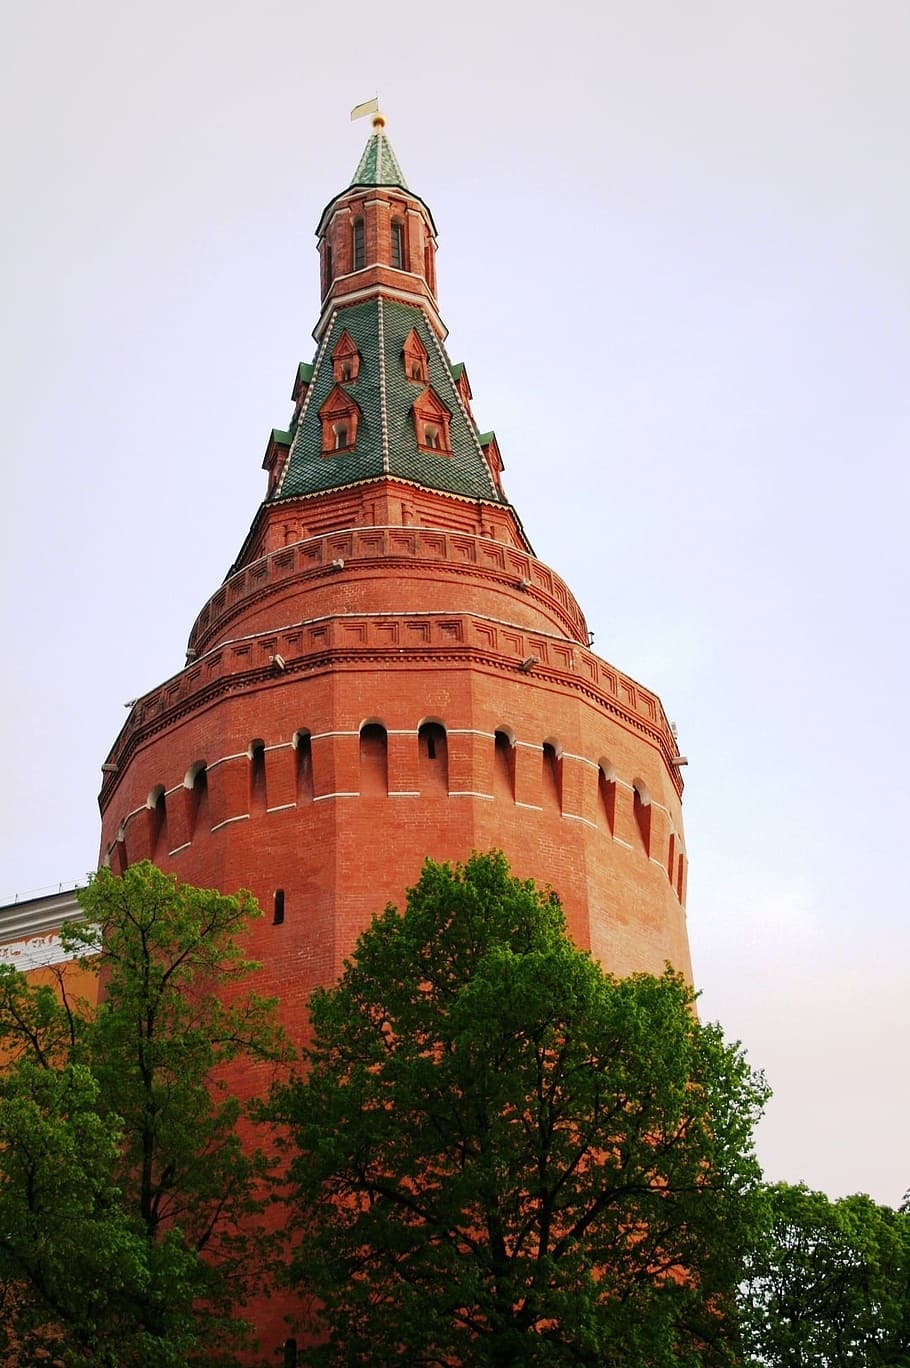 Tower, Arsenal, Tall, Cylindrical, red, faceted, corner, kremlin wall, trees, historic